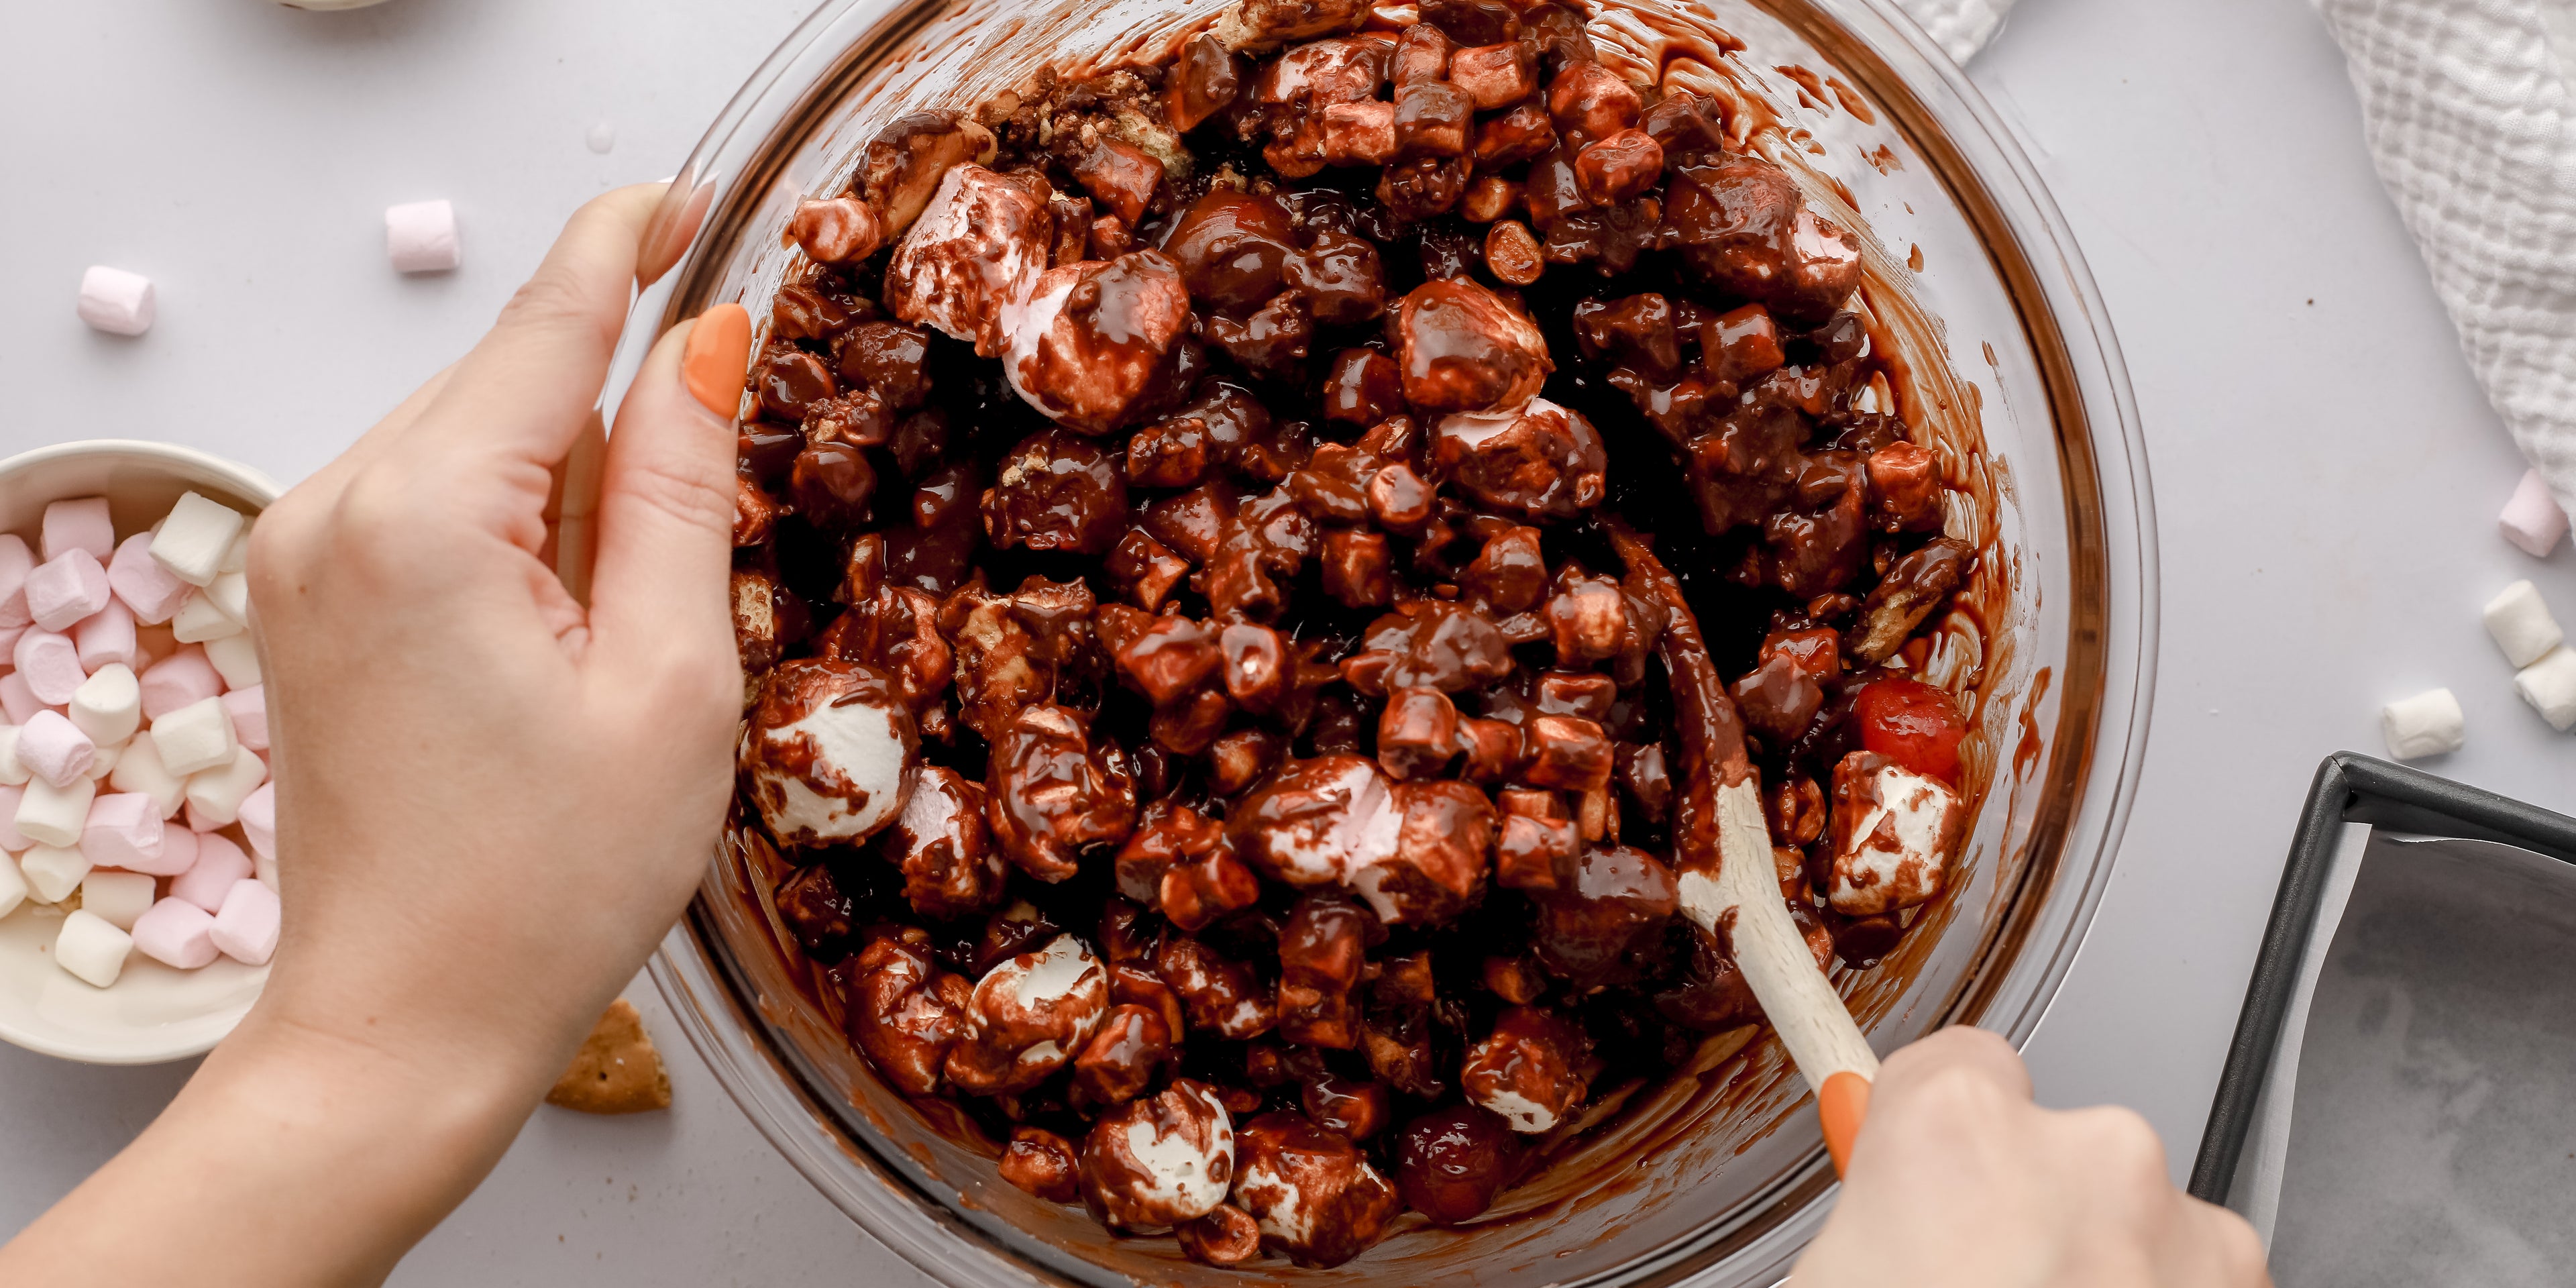 Rocky Road mixture in a bowl